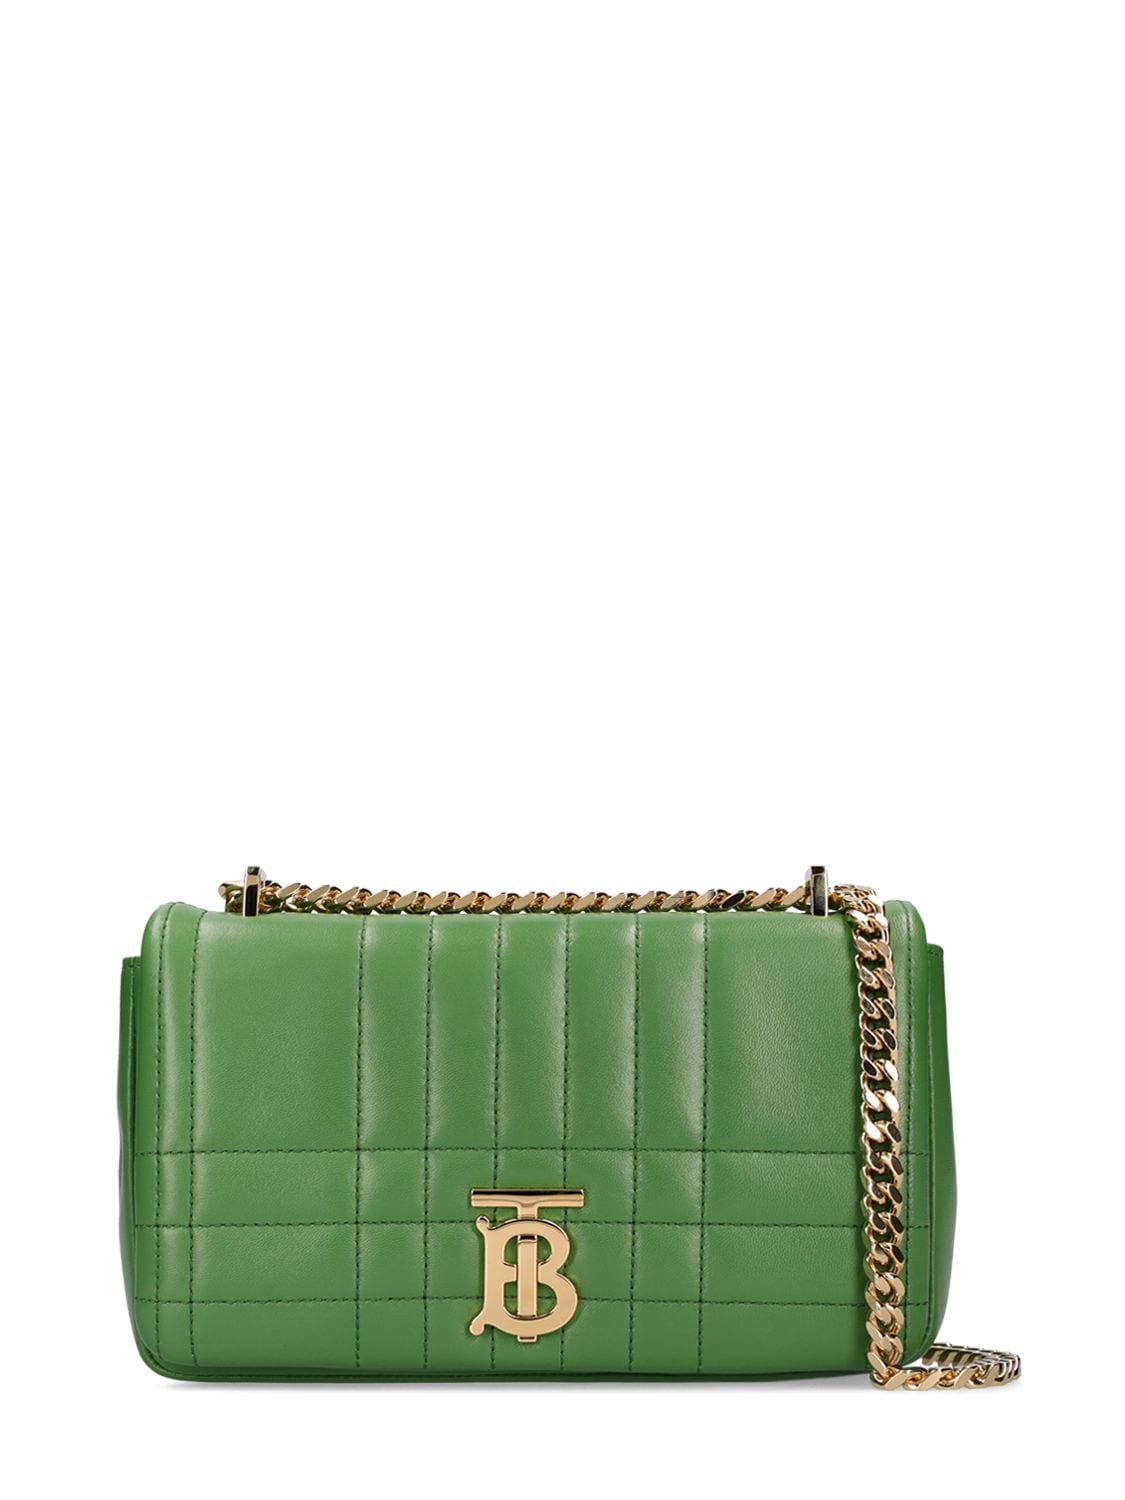 BURBERRY Small Lola Quilted Leather Shoulder Bag